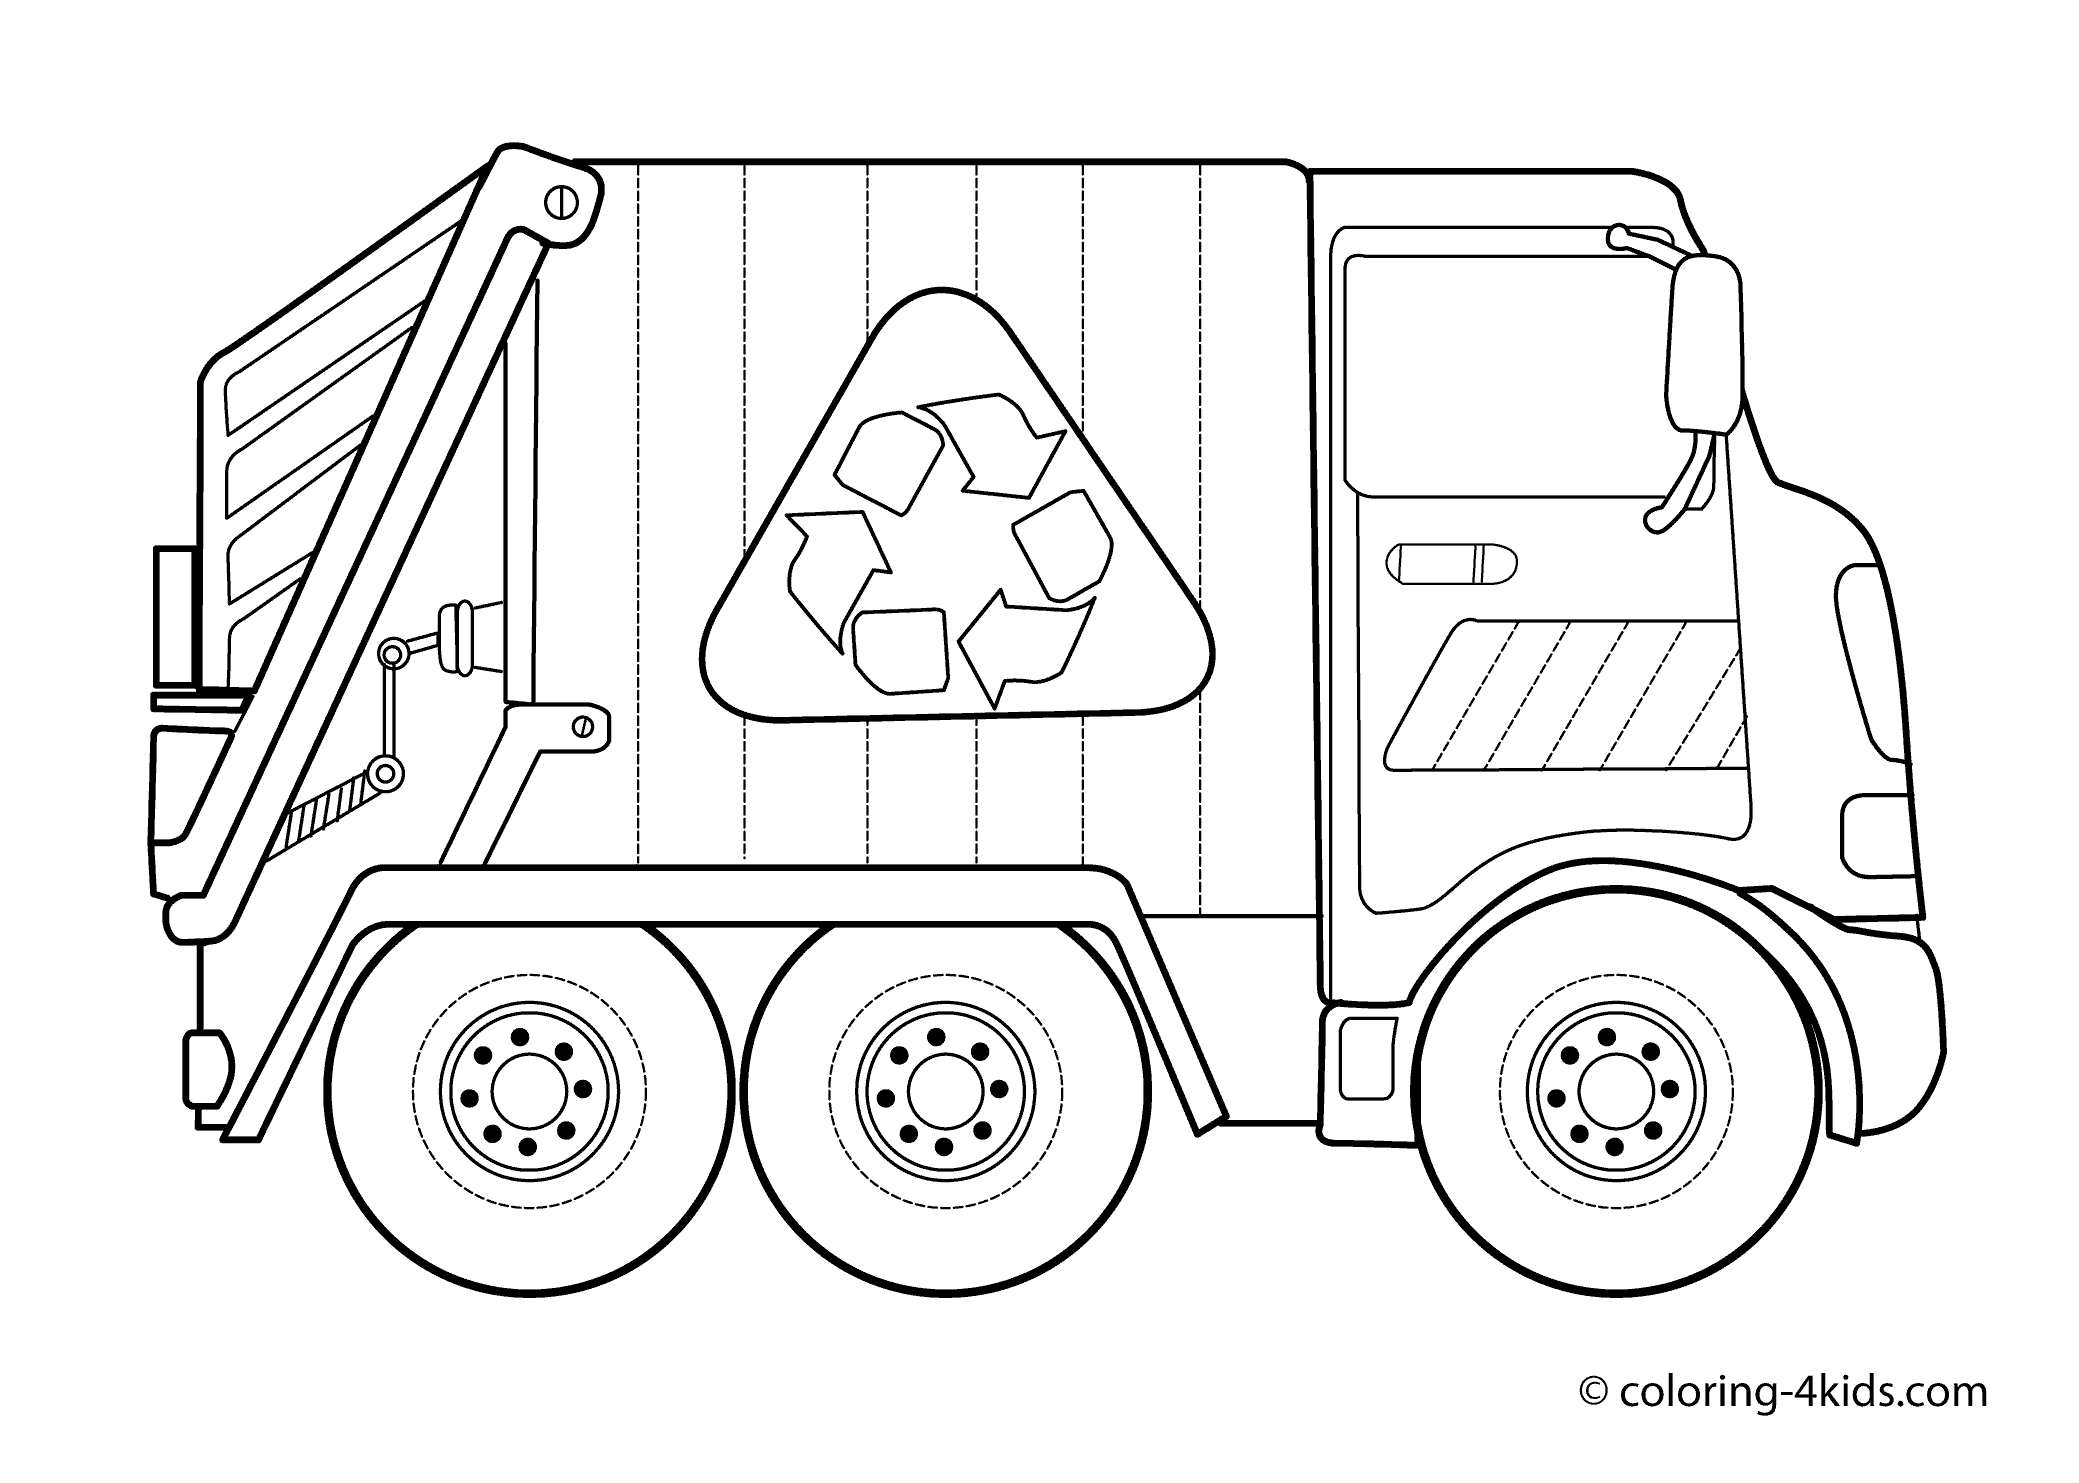 Garbage Truck Pictures To Color - Coloring Pages for Kids and for ...